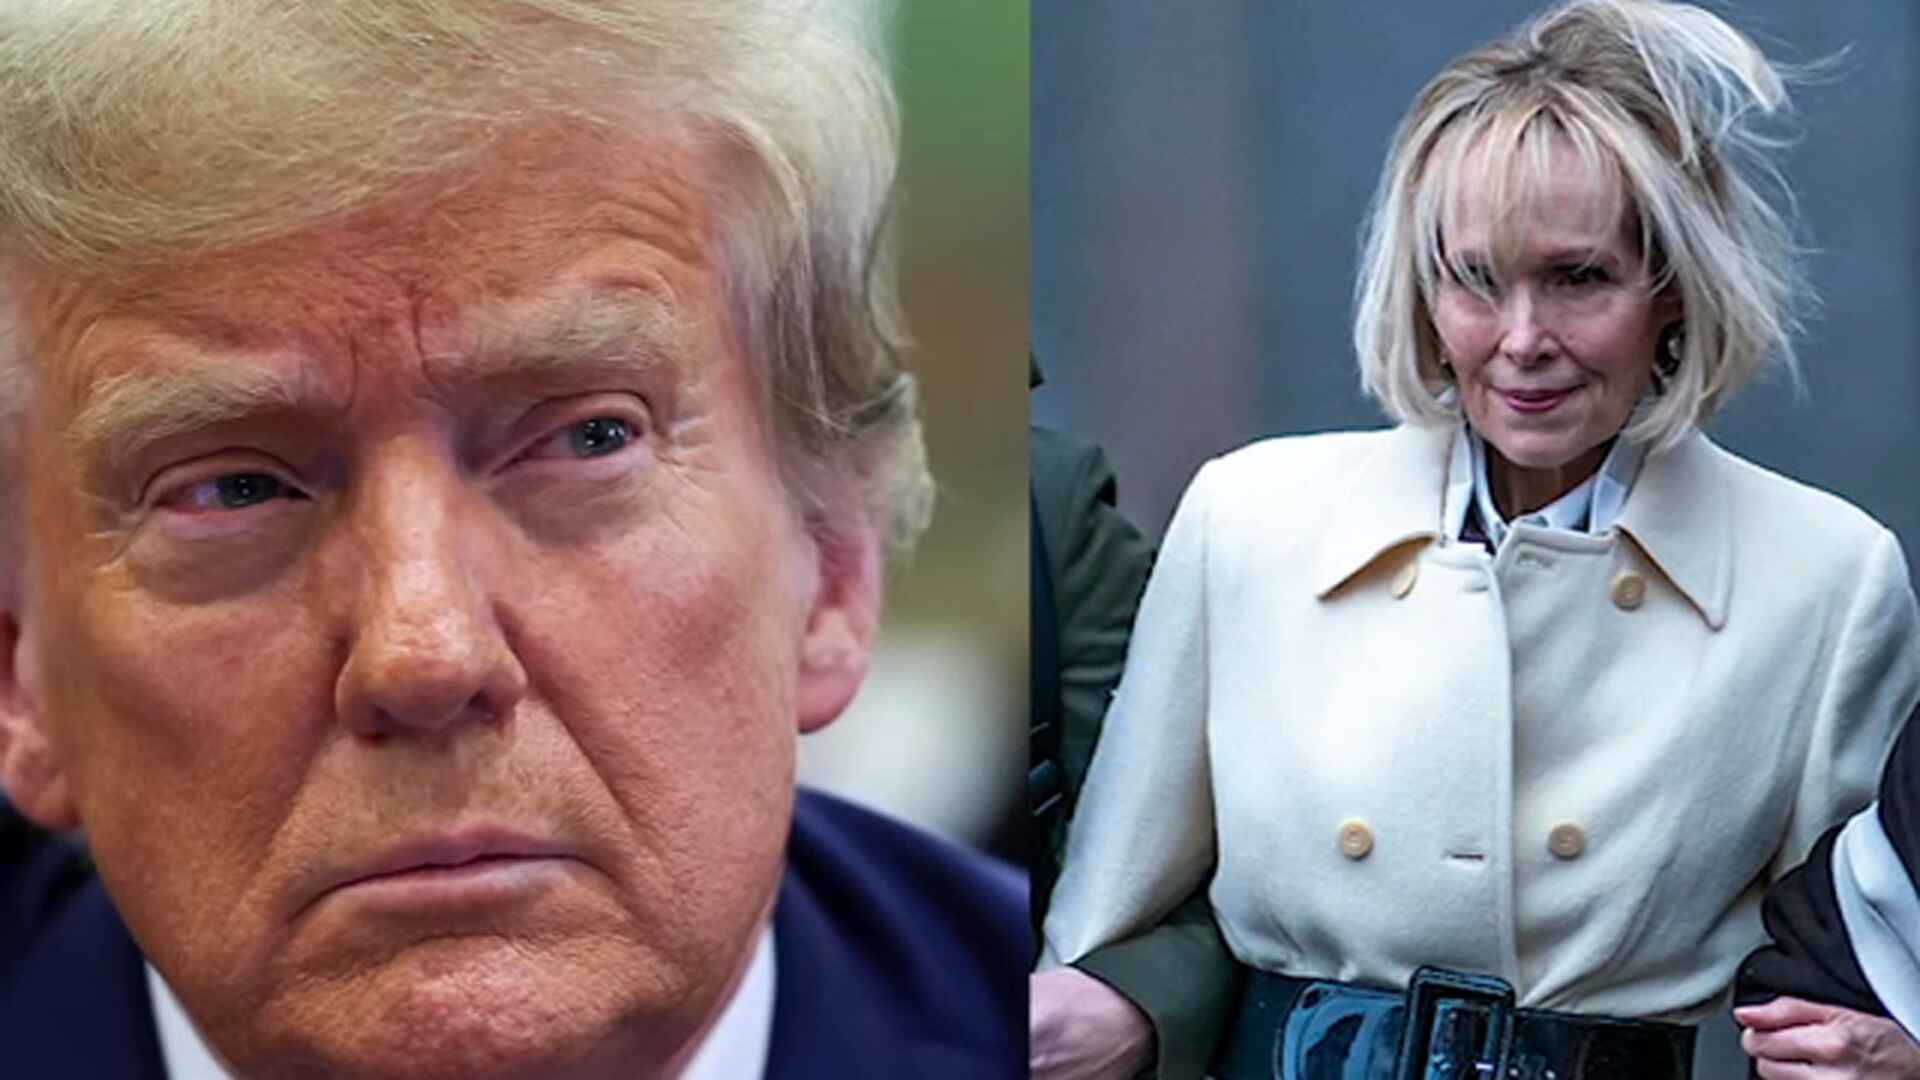 jury-orders-donald-trump-to-pay-e-jean-carroll-83-3-million-for-defamation